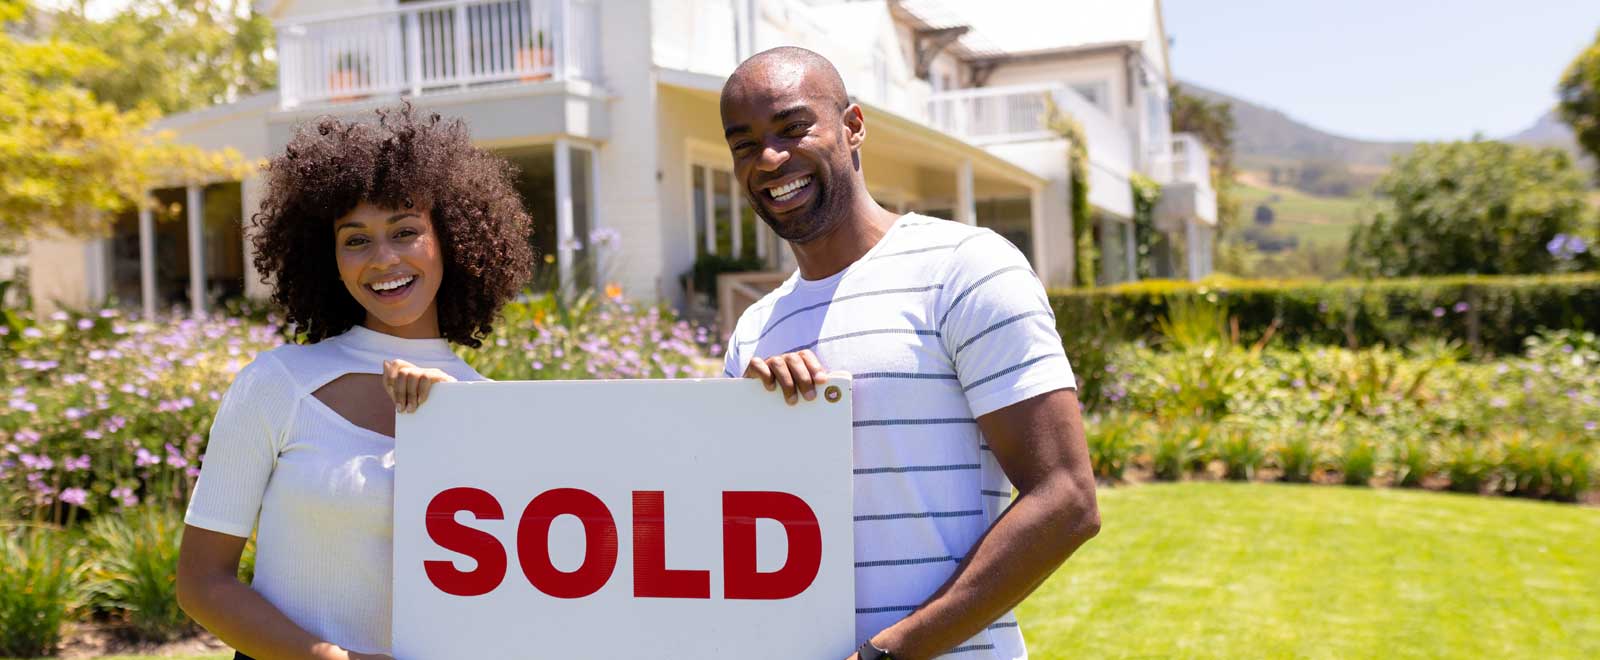 A couple standing in front of a house holding a "sold" sign.
